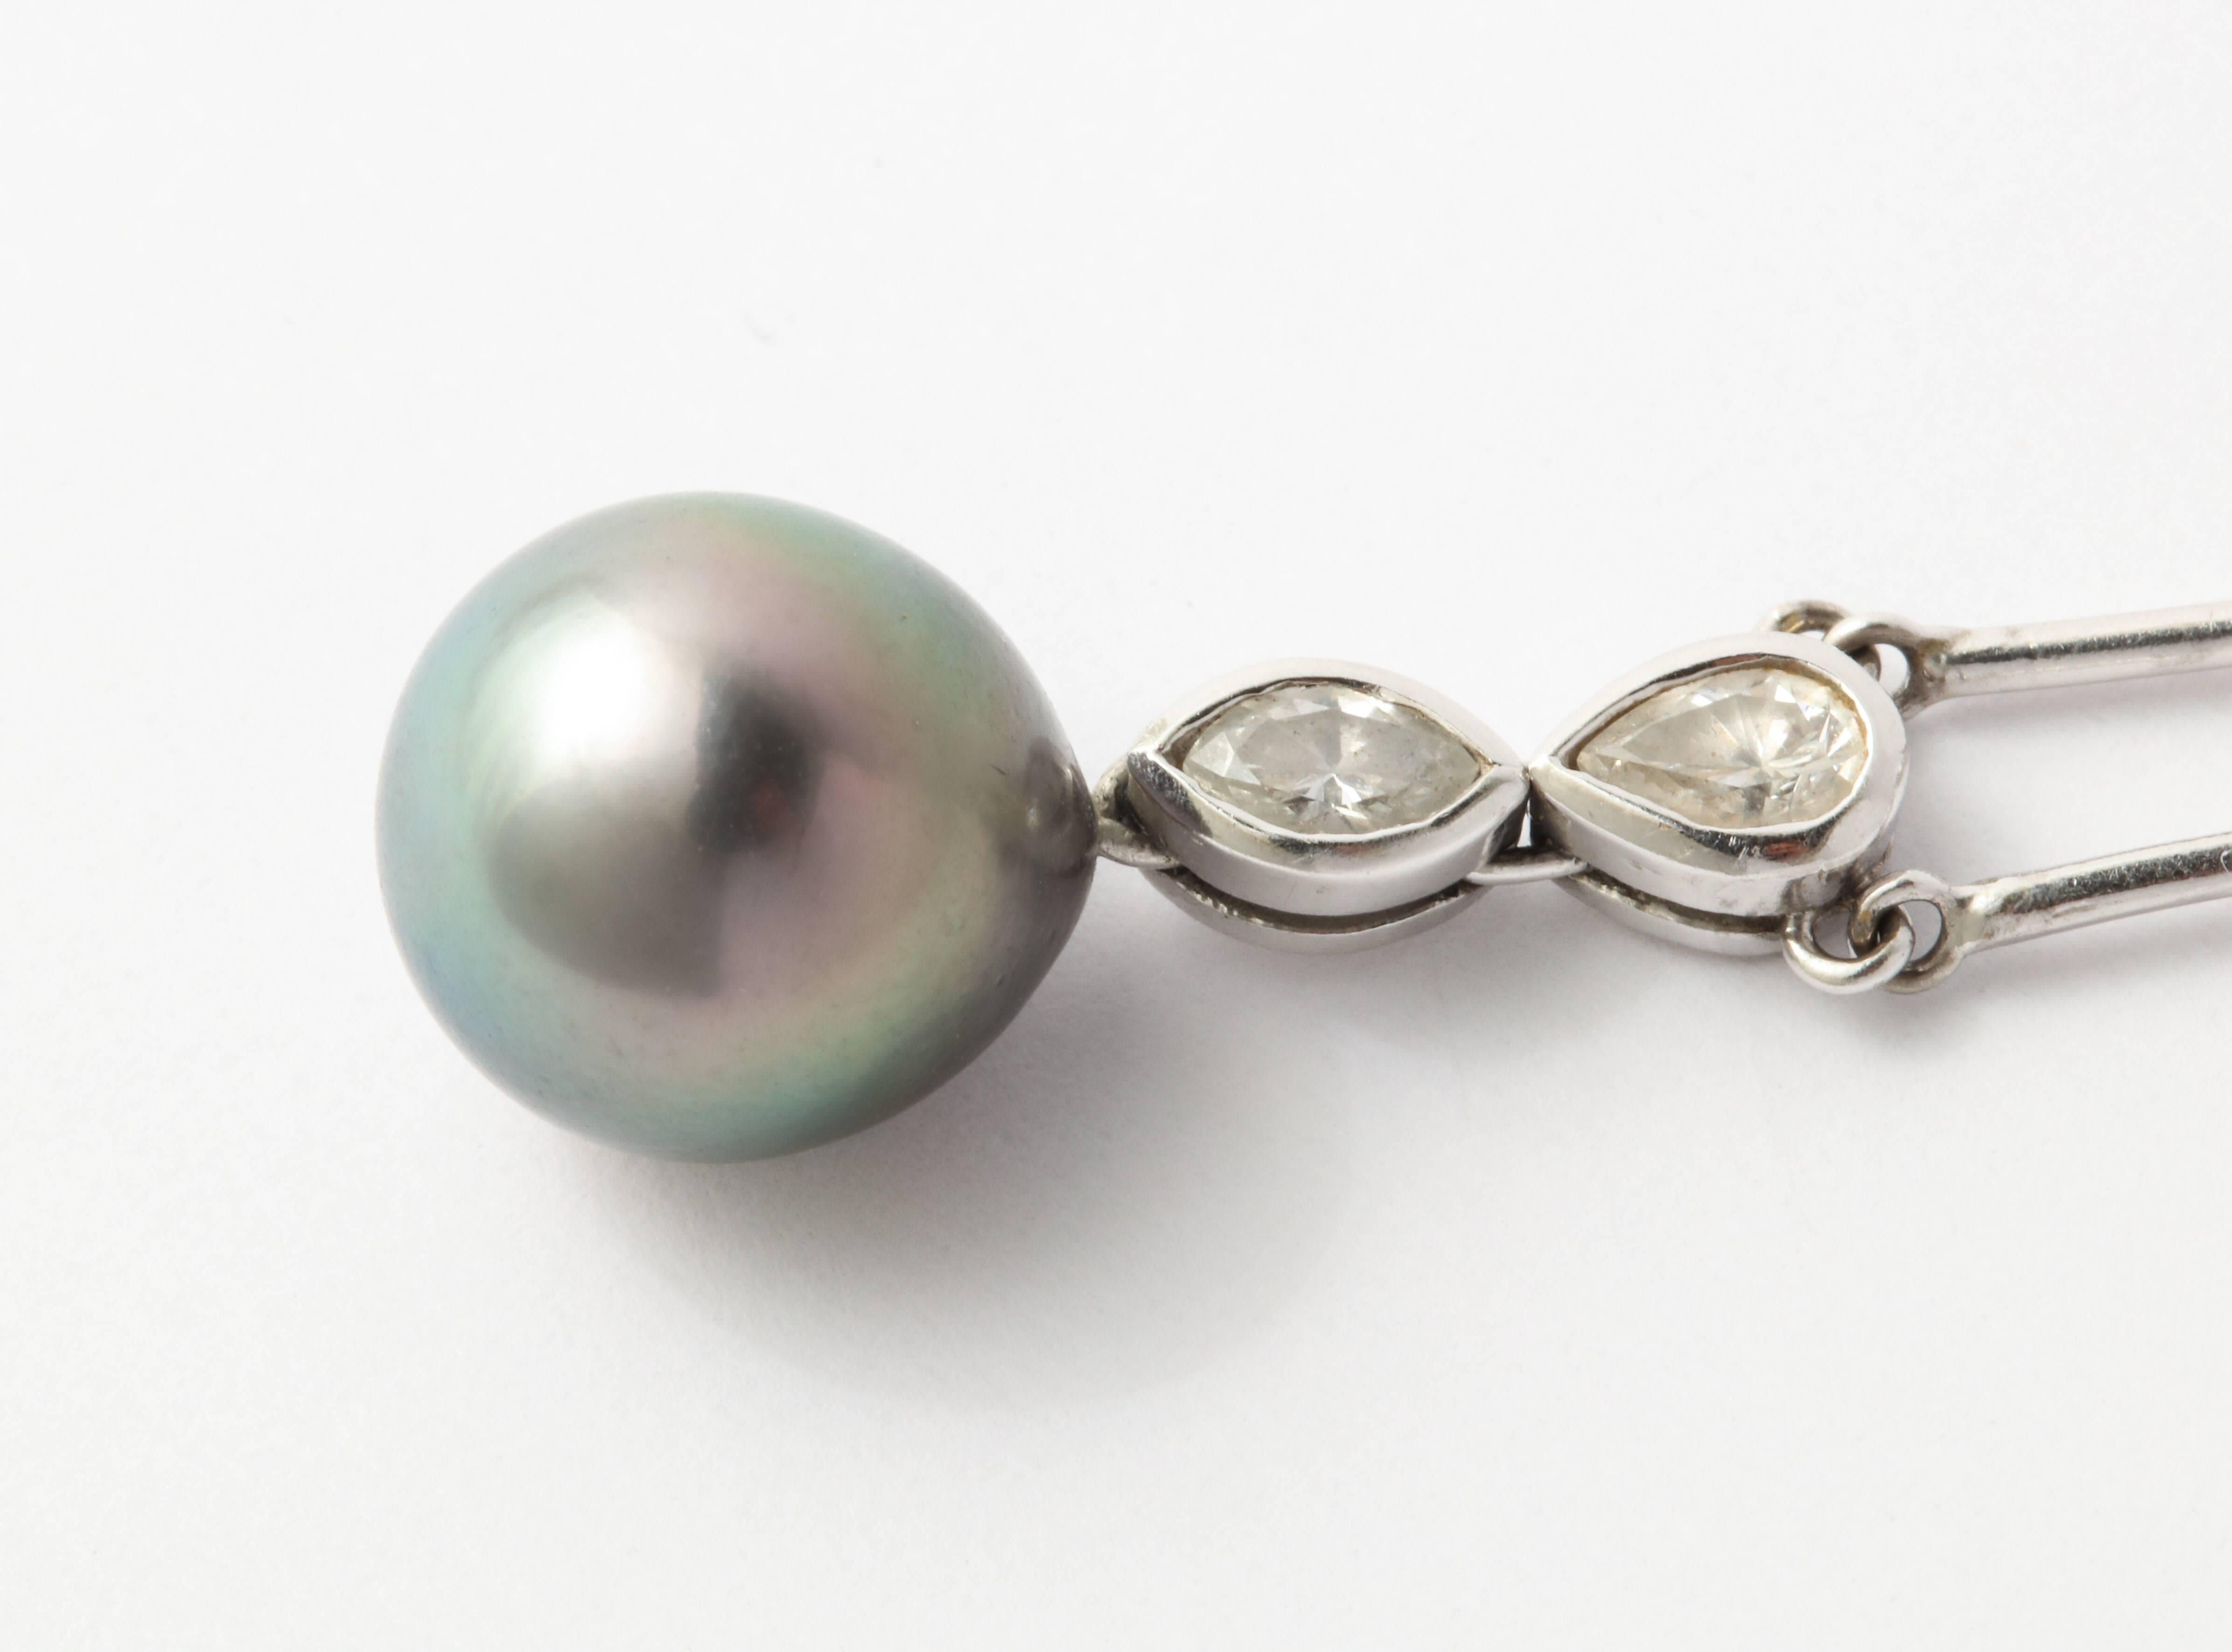 A flawless 11.3 mm teardrop Tahitian South Sea Pearl is thrilling in its smoothness and mirror like multi toned charcoal green color, topped by a pear shaped and marquise shape diamond..  When I study the pearl I am amazed that nature created this